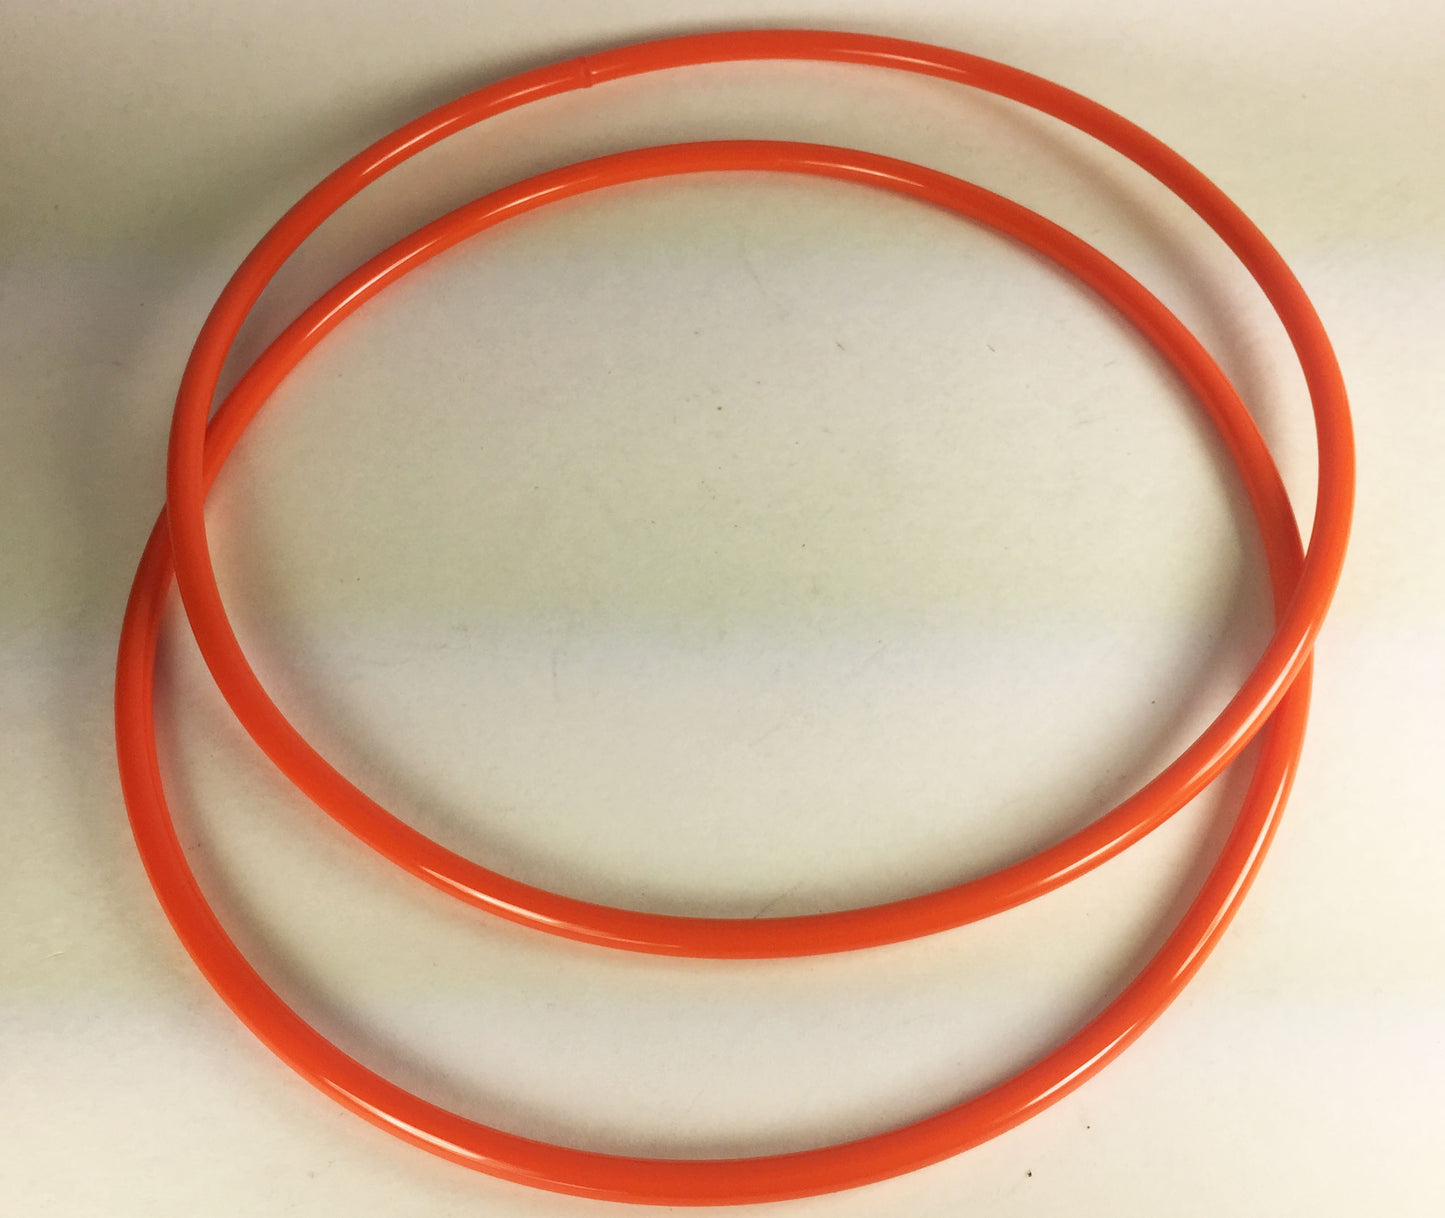 Set of 2 Round URETHANE MOTOR DRIVE BELTS for DRAPER BS355A 3 Wheel BAND SAW